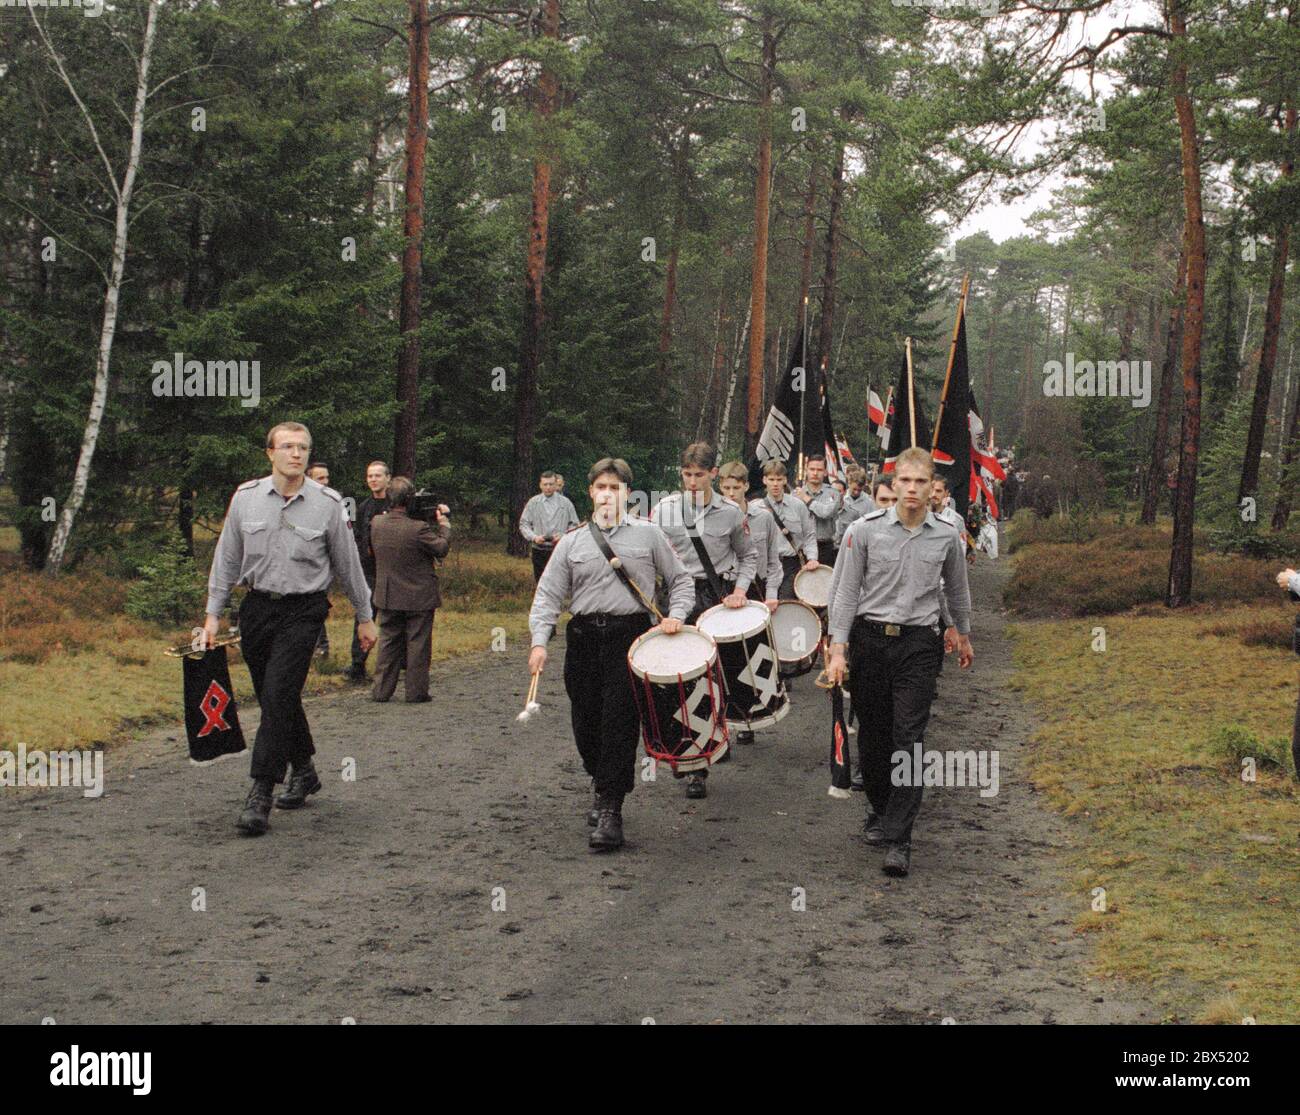 Brandenburg / Nazis / Rights / 18.11.1990 Half near Berlin. The Viking Youth marched up to a flag roll call with drummer and fanfare corps and in uniform. A number of right-wing groups hold a heroic commemoration ceremony. More than 20,000 German soldiers who died fighting the Red Army in early 1945 are buried in the cemetery. Most of the groups came from North Rhine-Westphalia, one from Forst, Brandenburg and Berlin (Wandalen). // Neo-Nazis / Youth / Nazi / [automated translation] Stock Photo